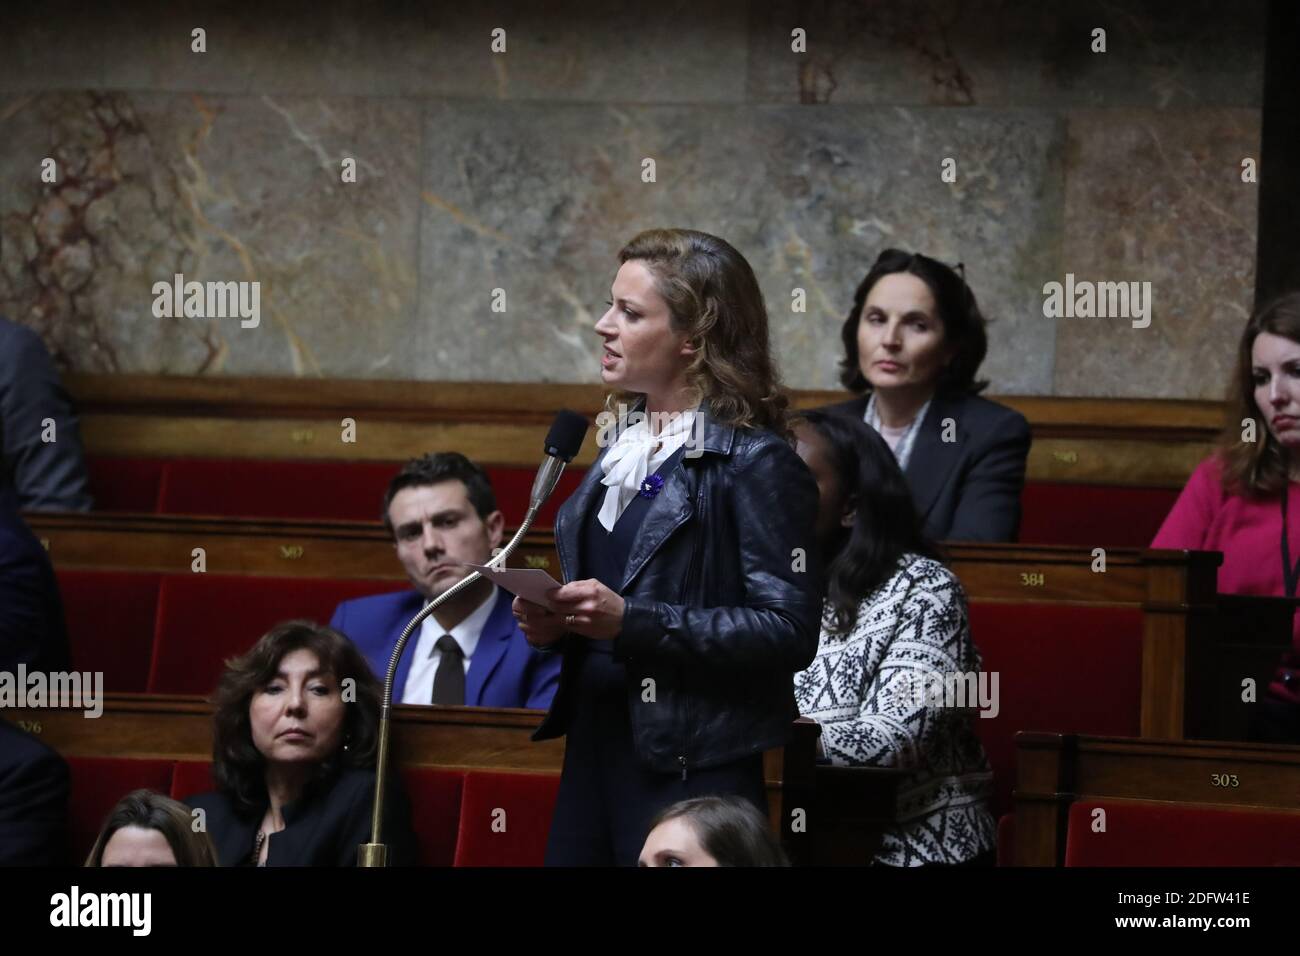 Member of Parliament for 'La Republique en Marche' Blandine Brocard during a session of 'Questions to the Government' at the French National Assembly in Paris, France on November 13th, 2018. Photo by Henri Szwarc/ABACAPRESS.COM Stock Photo